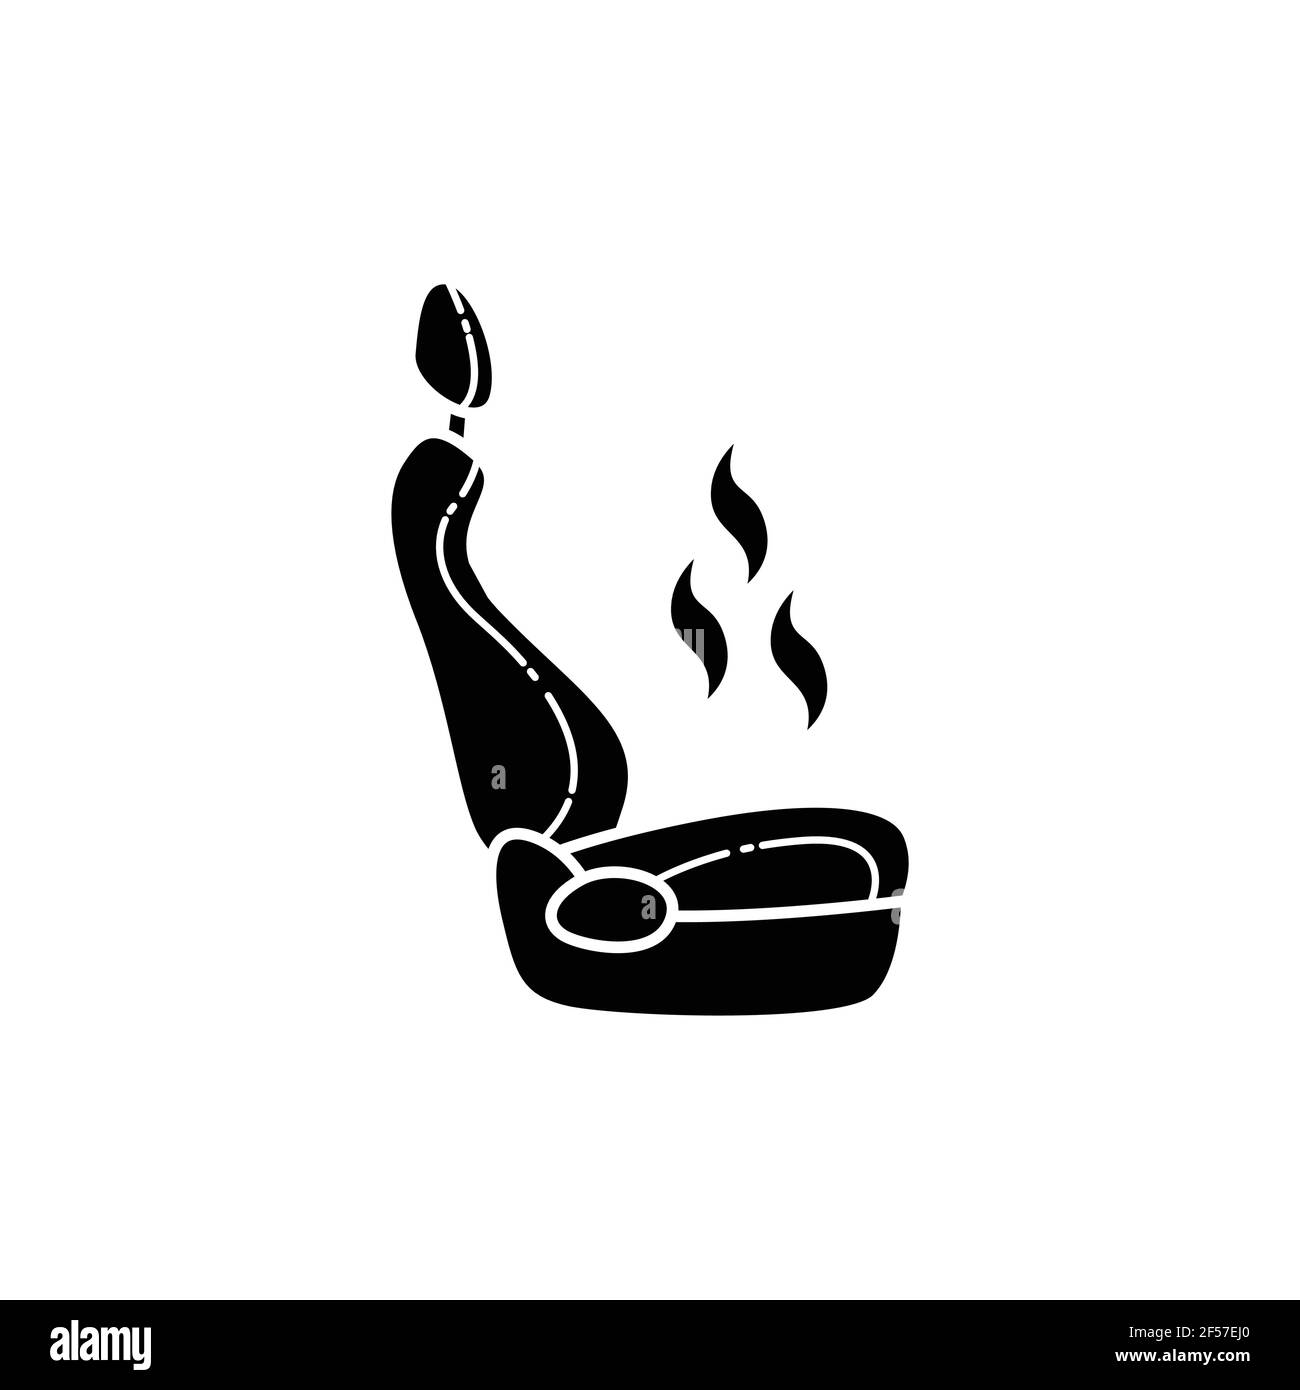 Heated seat Stock Vector Images - Alamy